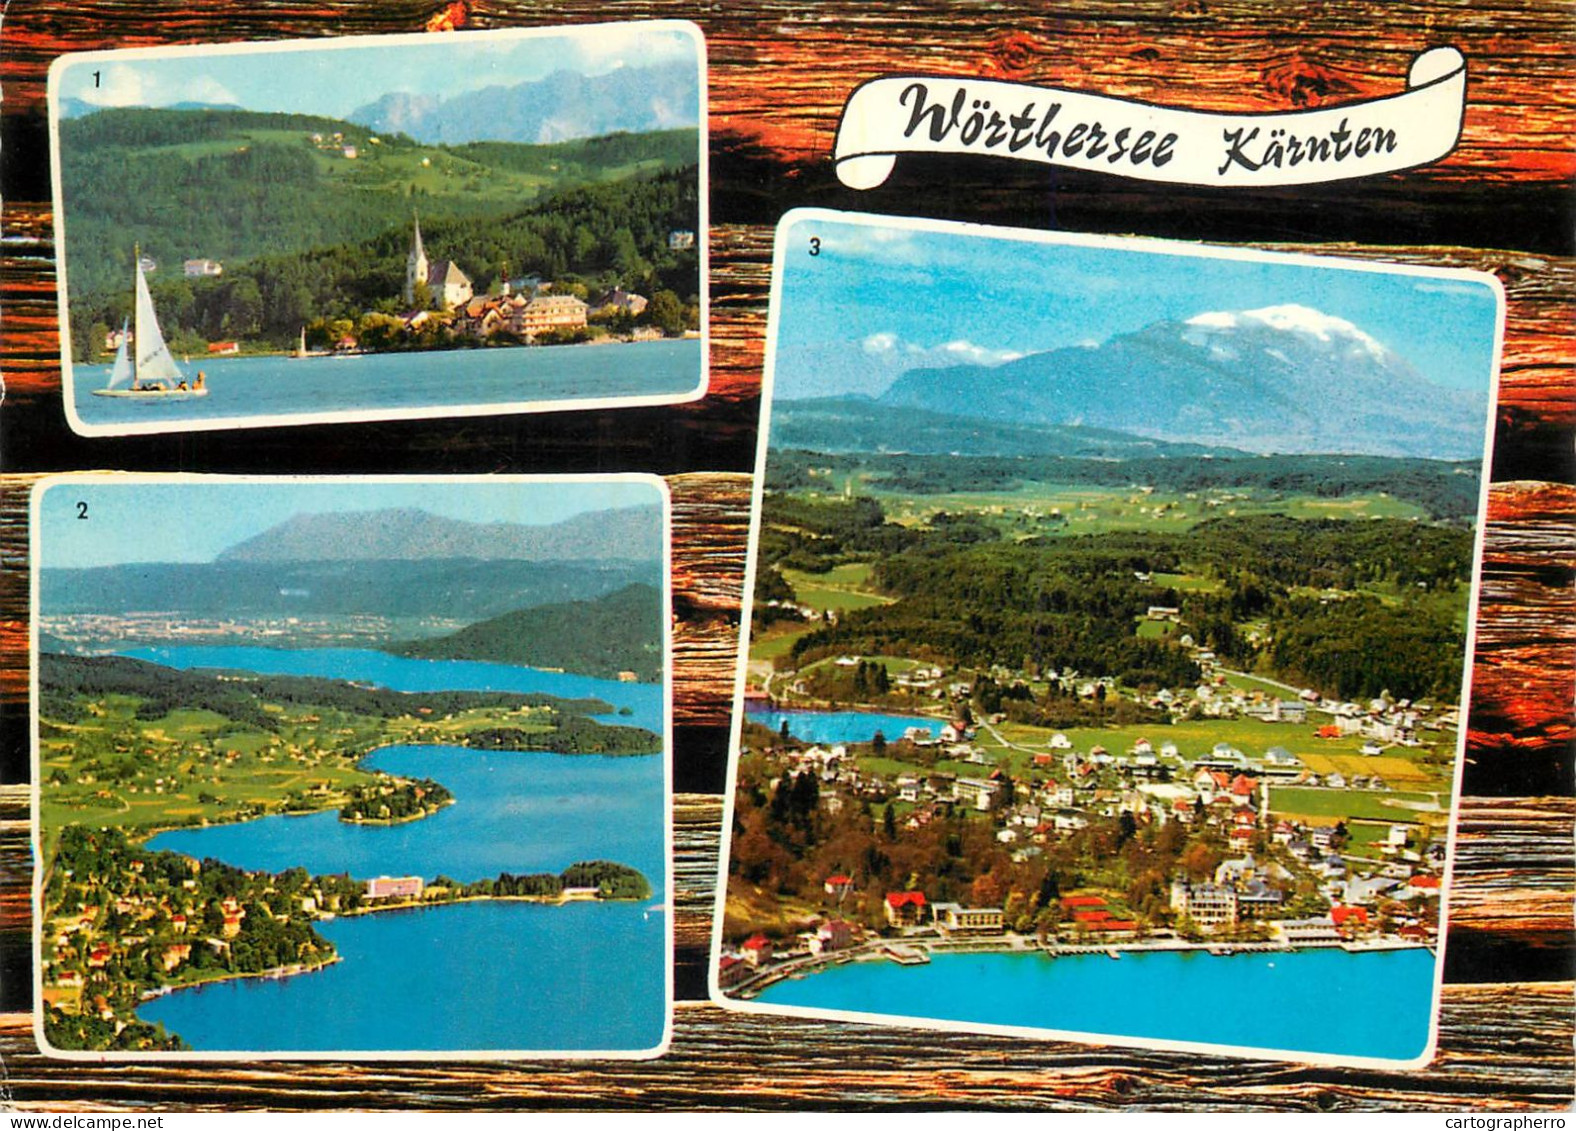 Navigation Sailing Vessels & Boats Themed Postcard Worthersee Karnten Yacht - Segelboote